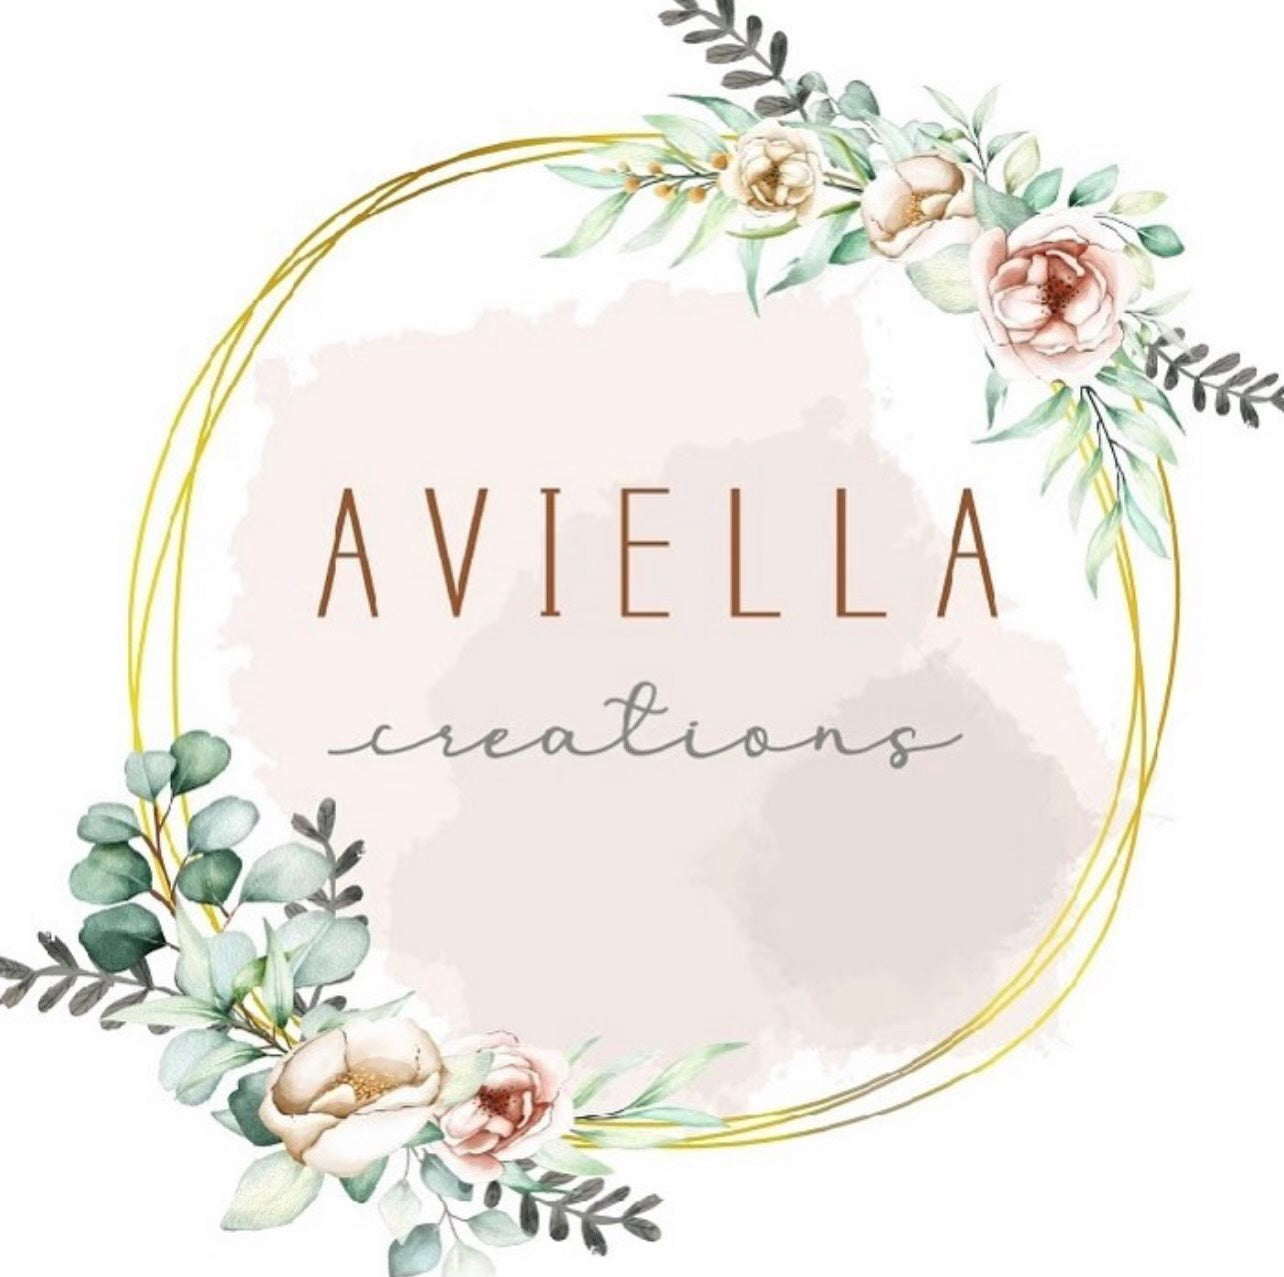 Polymer Clay Earring Workshop with Aviella Creations